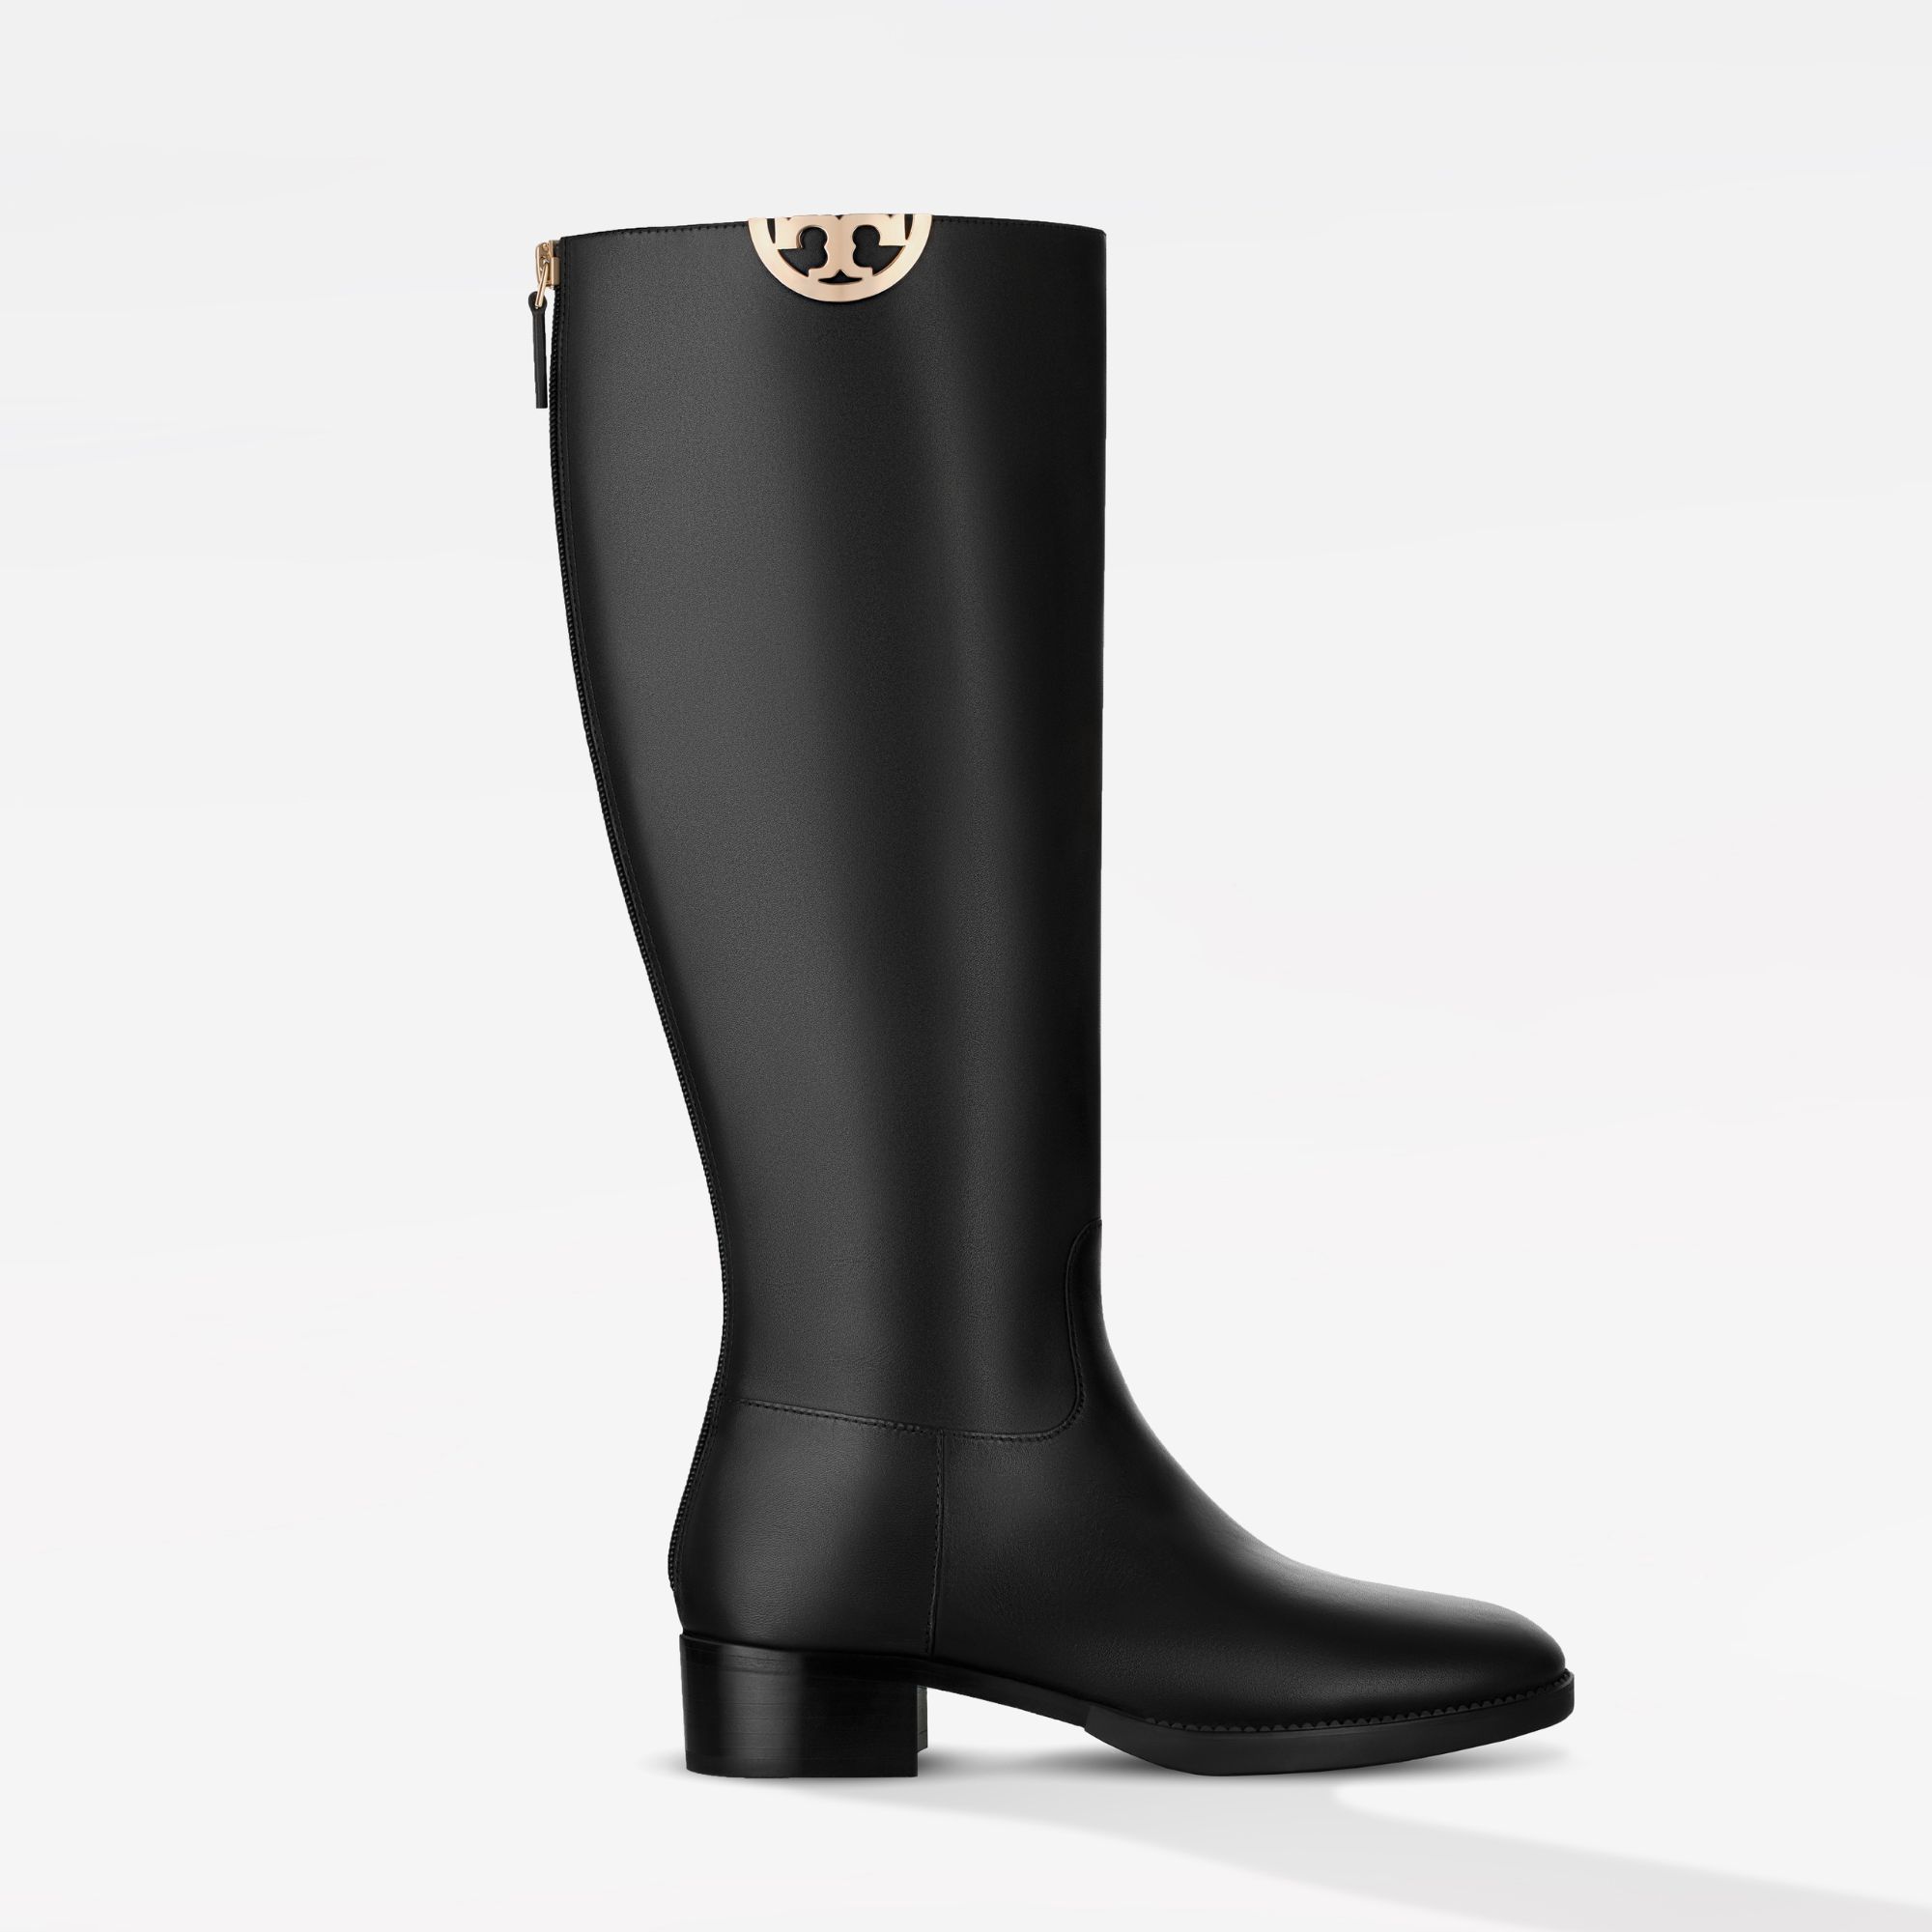 Tory Burch Boots Photoshoot for e-commerce purpose